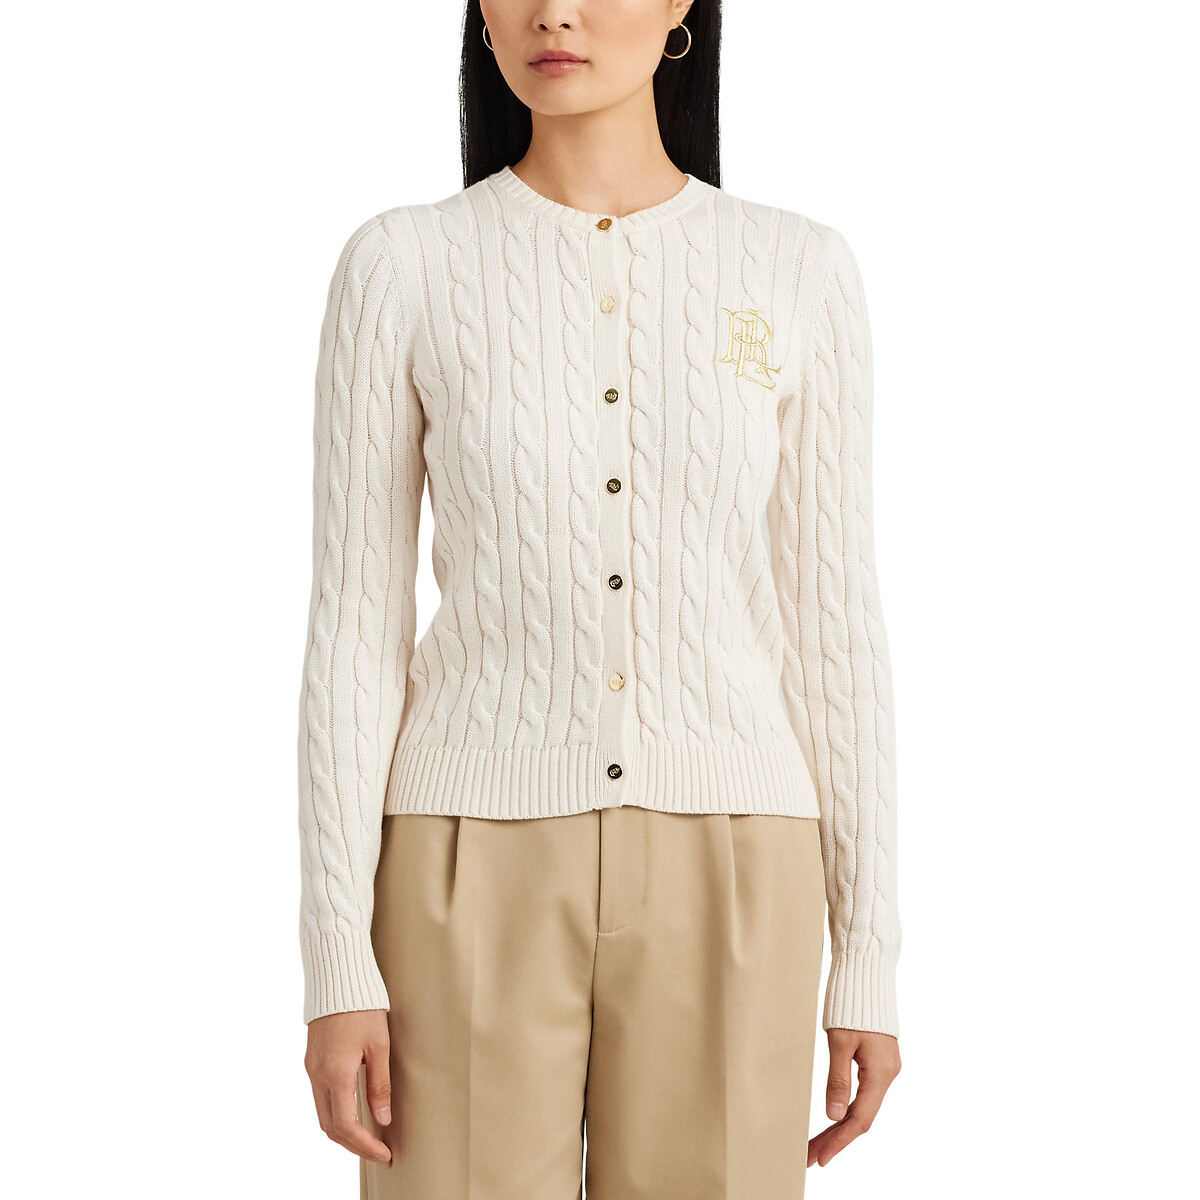 Ralhan Cable Knit Cardigan in Cotton with Crew Neck and Button Fastening